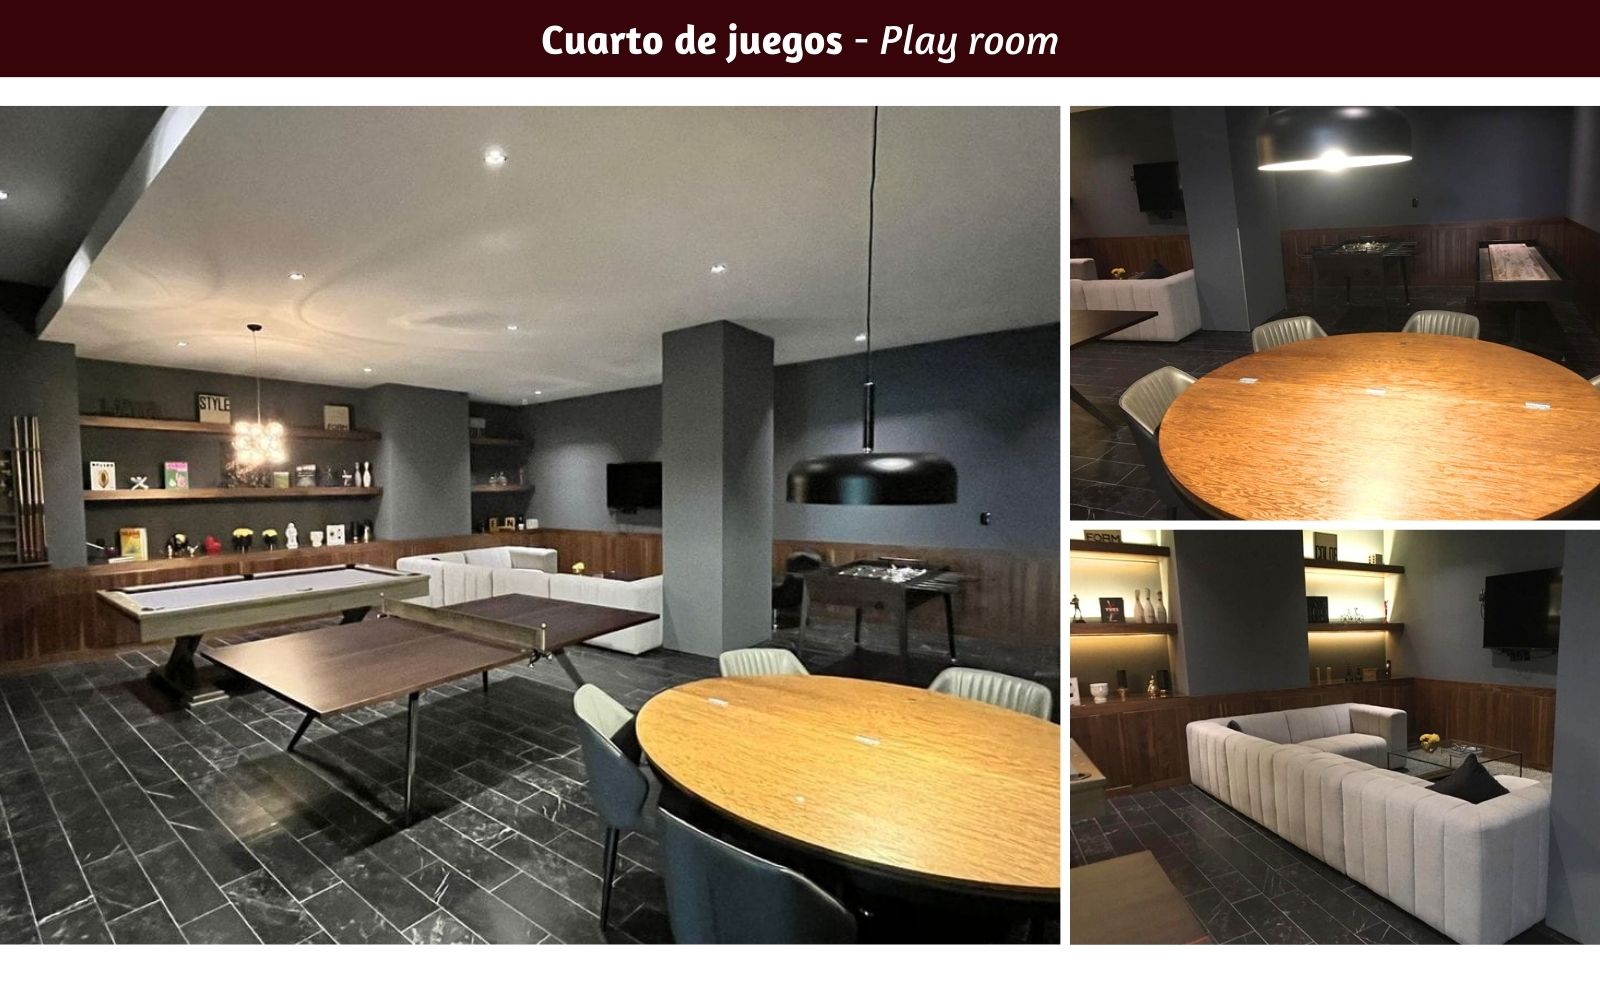 Luxury apartment with laundry area, 30 amenities, 13,000 m2 of green areas, designed by renown architect firm, Fuentes del Pedregal